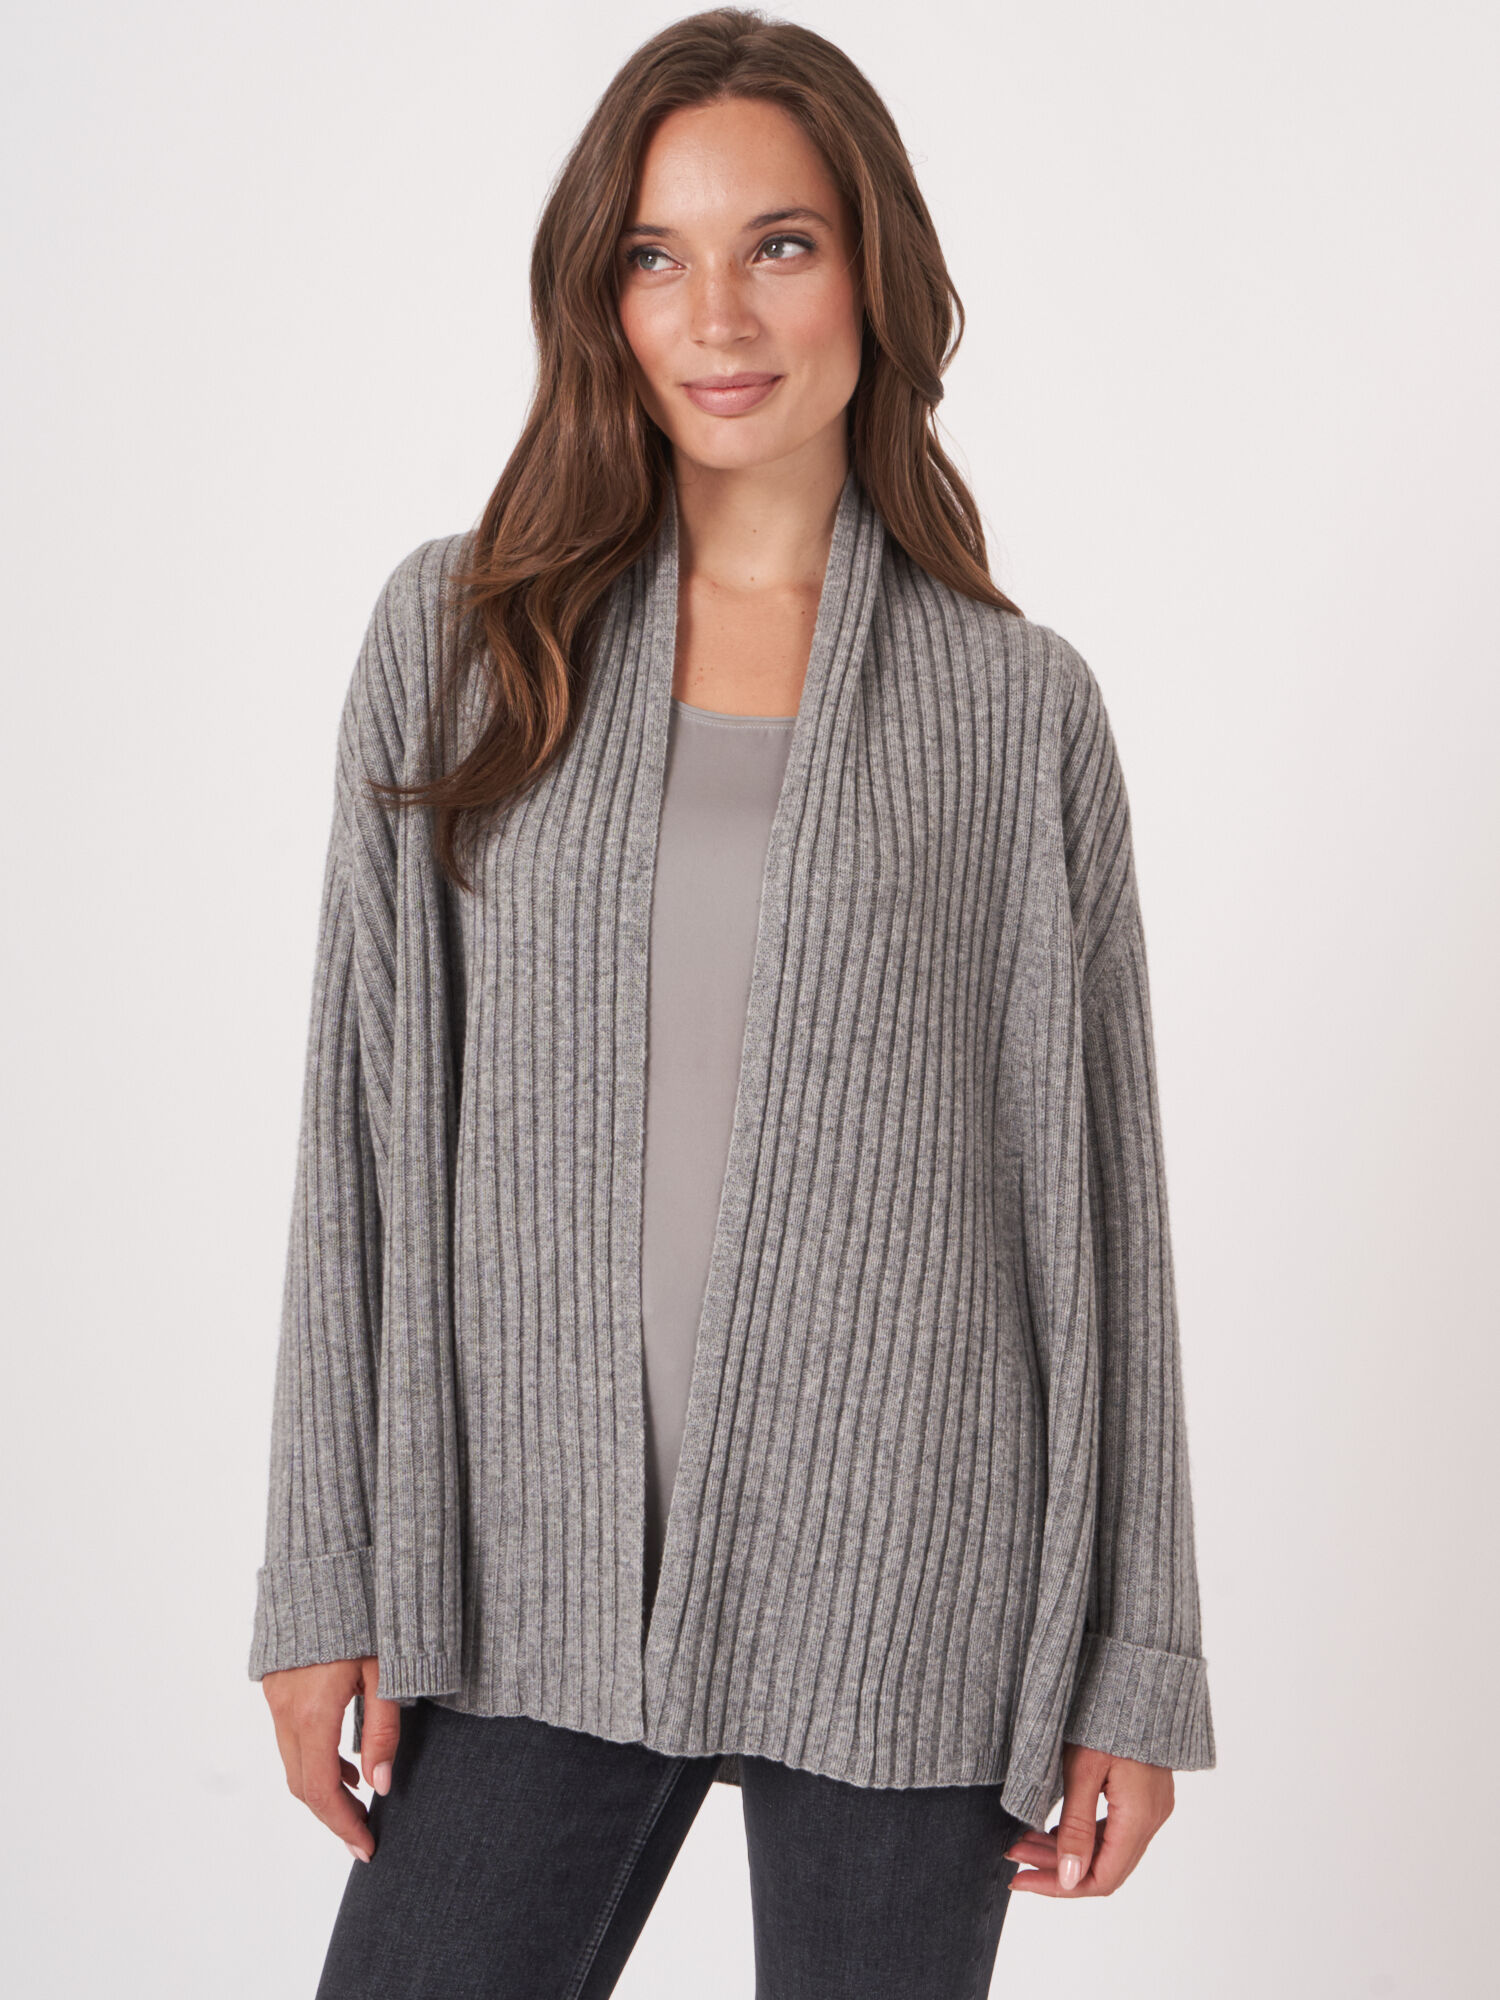 Women's 3/4 sleeve open cardigan with shawl collar | REPEAT cashmere